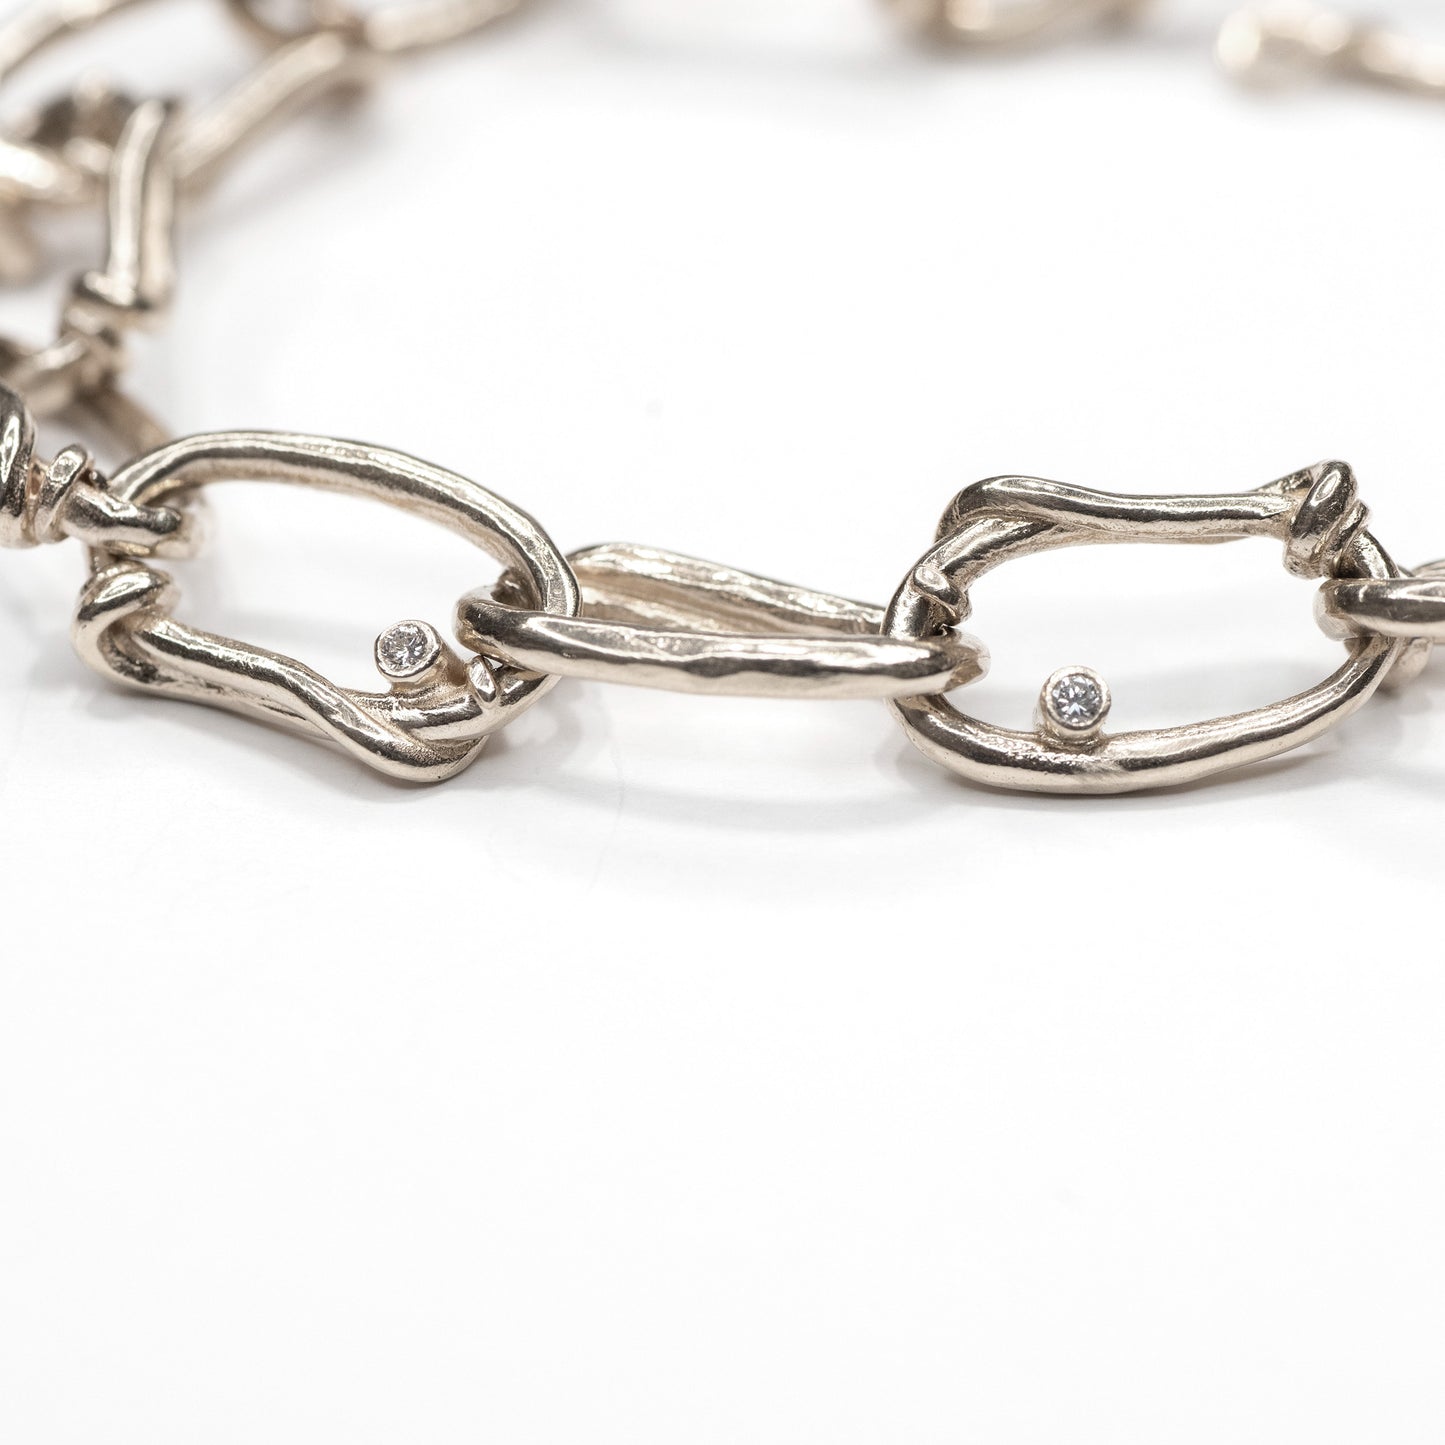 14k Oval Link Chunky Chain Yellow or White Gold Bracelet with Diamonds